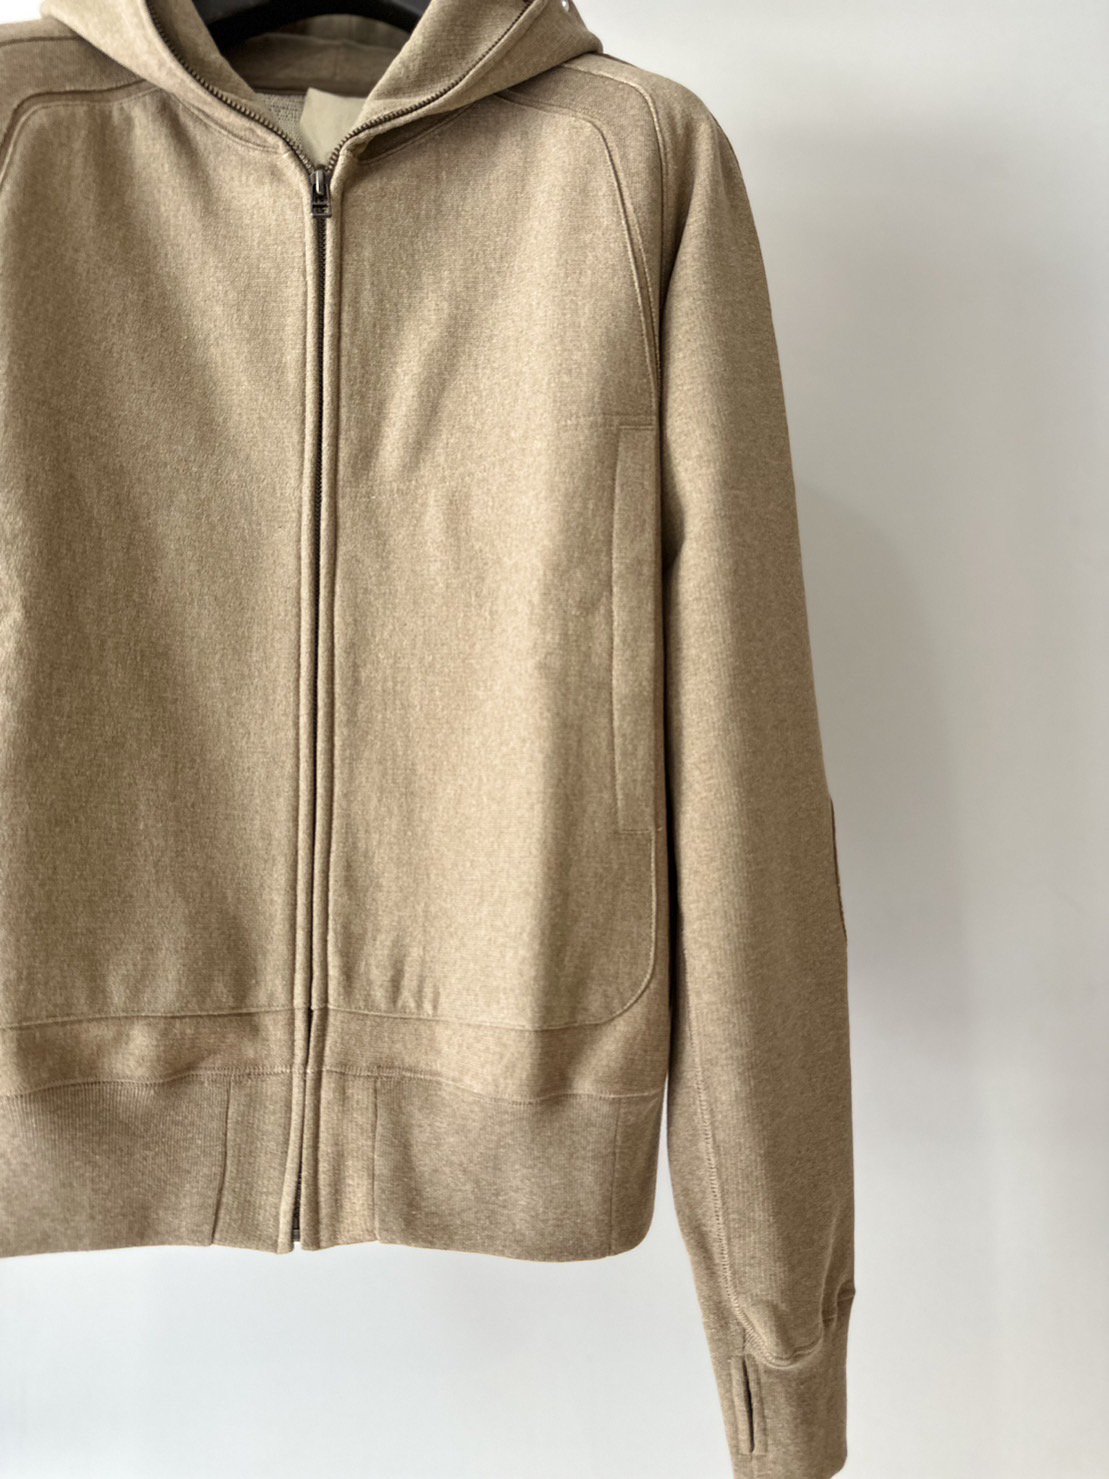 JIAN YE<br />SOLID HOODIE / beige<img class='new_mark_img2' src='https://img.shop-pro.jp/img/new/icons14.gif' style='border:none;display:inline;margin:0px;padding:0px;width:auto;' />